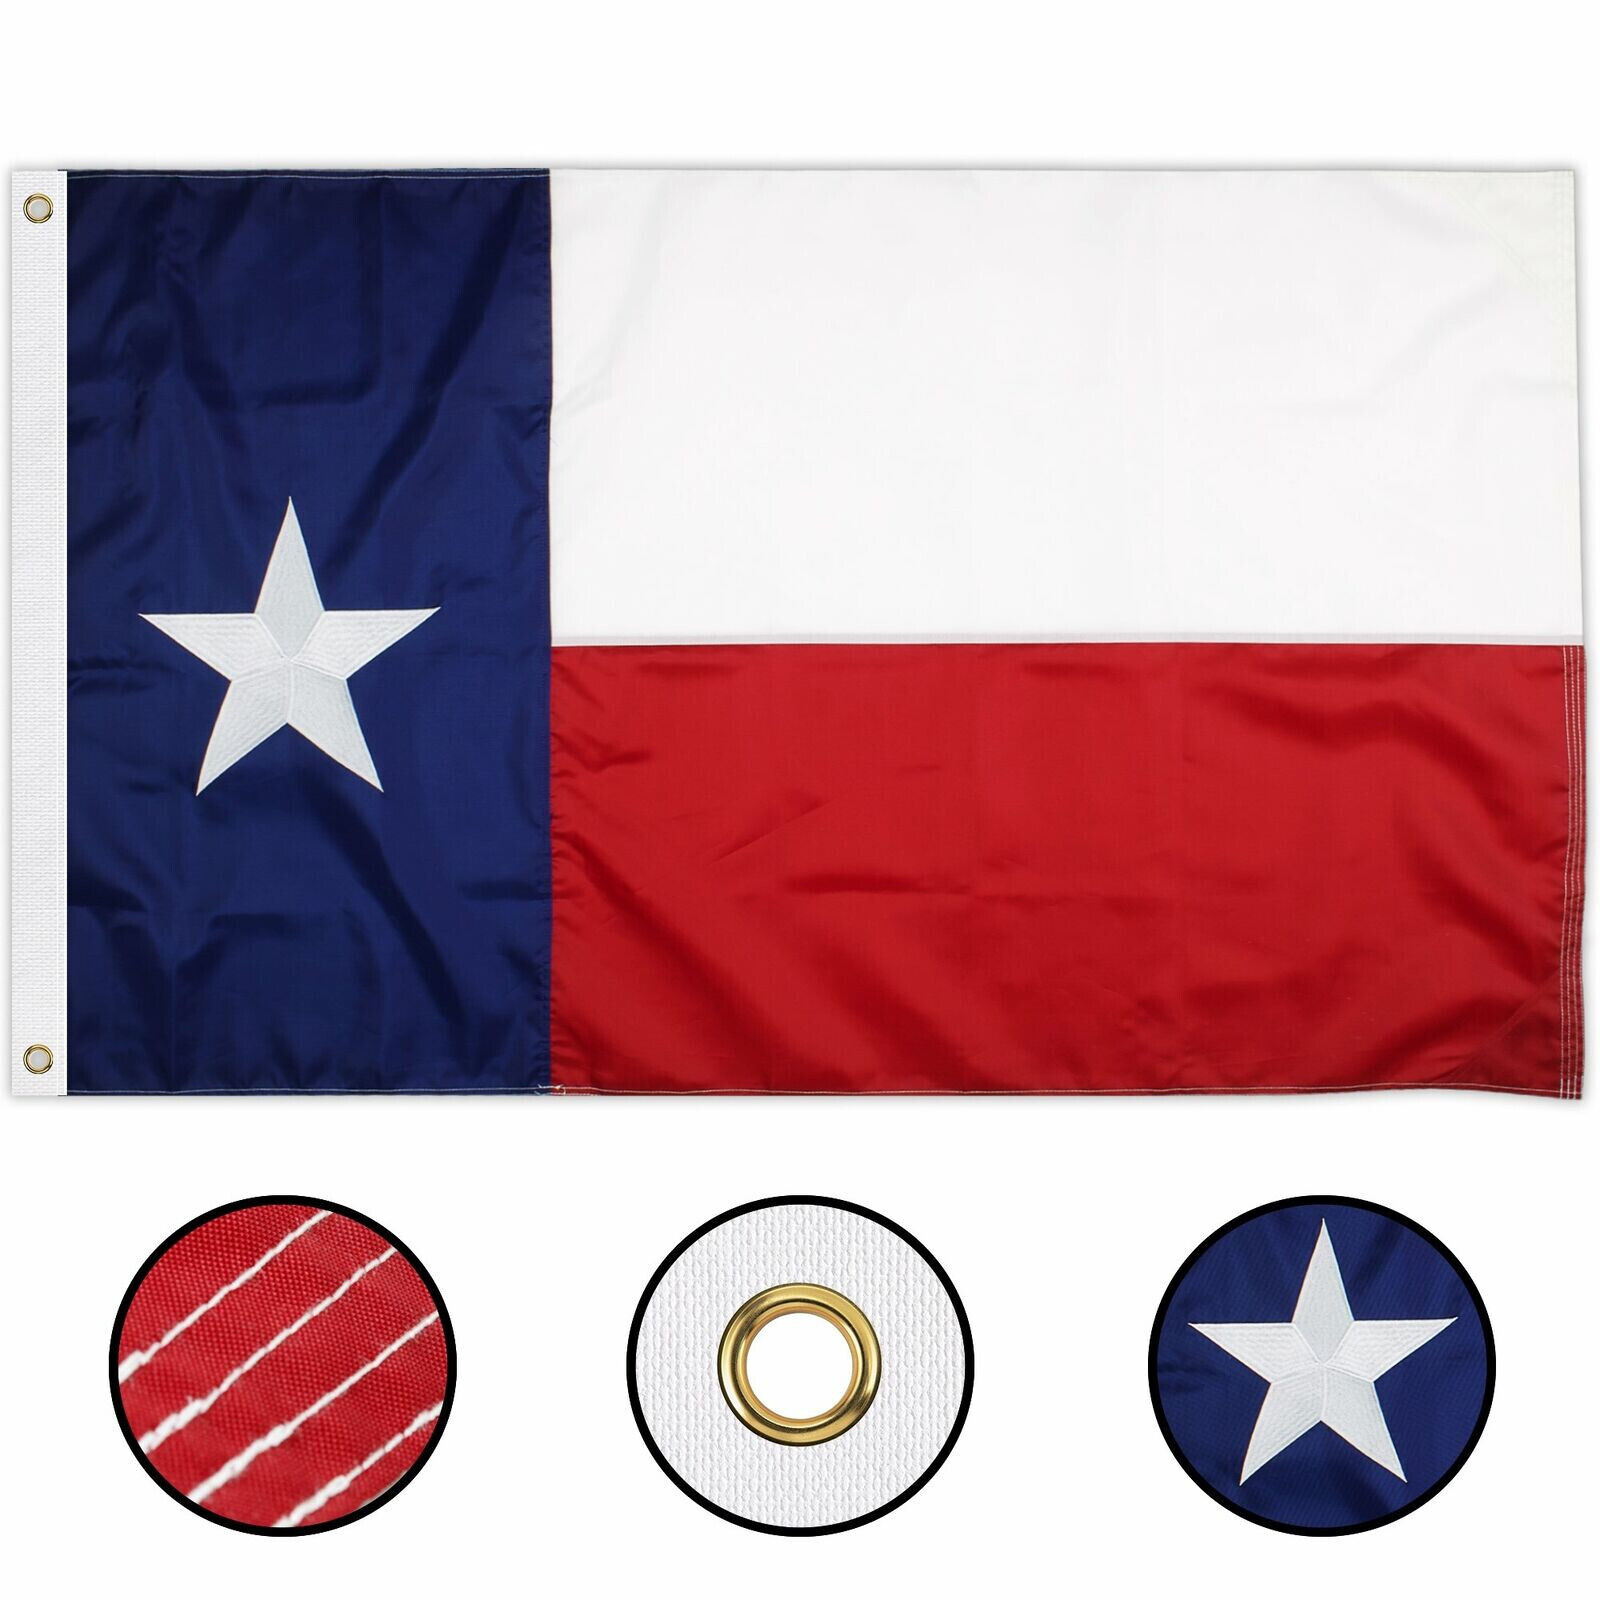 State of Texas Flag 3x5 ft Embroidered Outdoor Heavy Duty Flags Durable Double